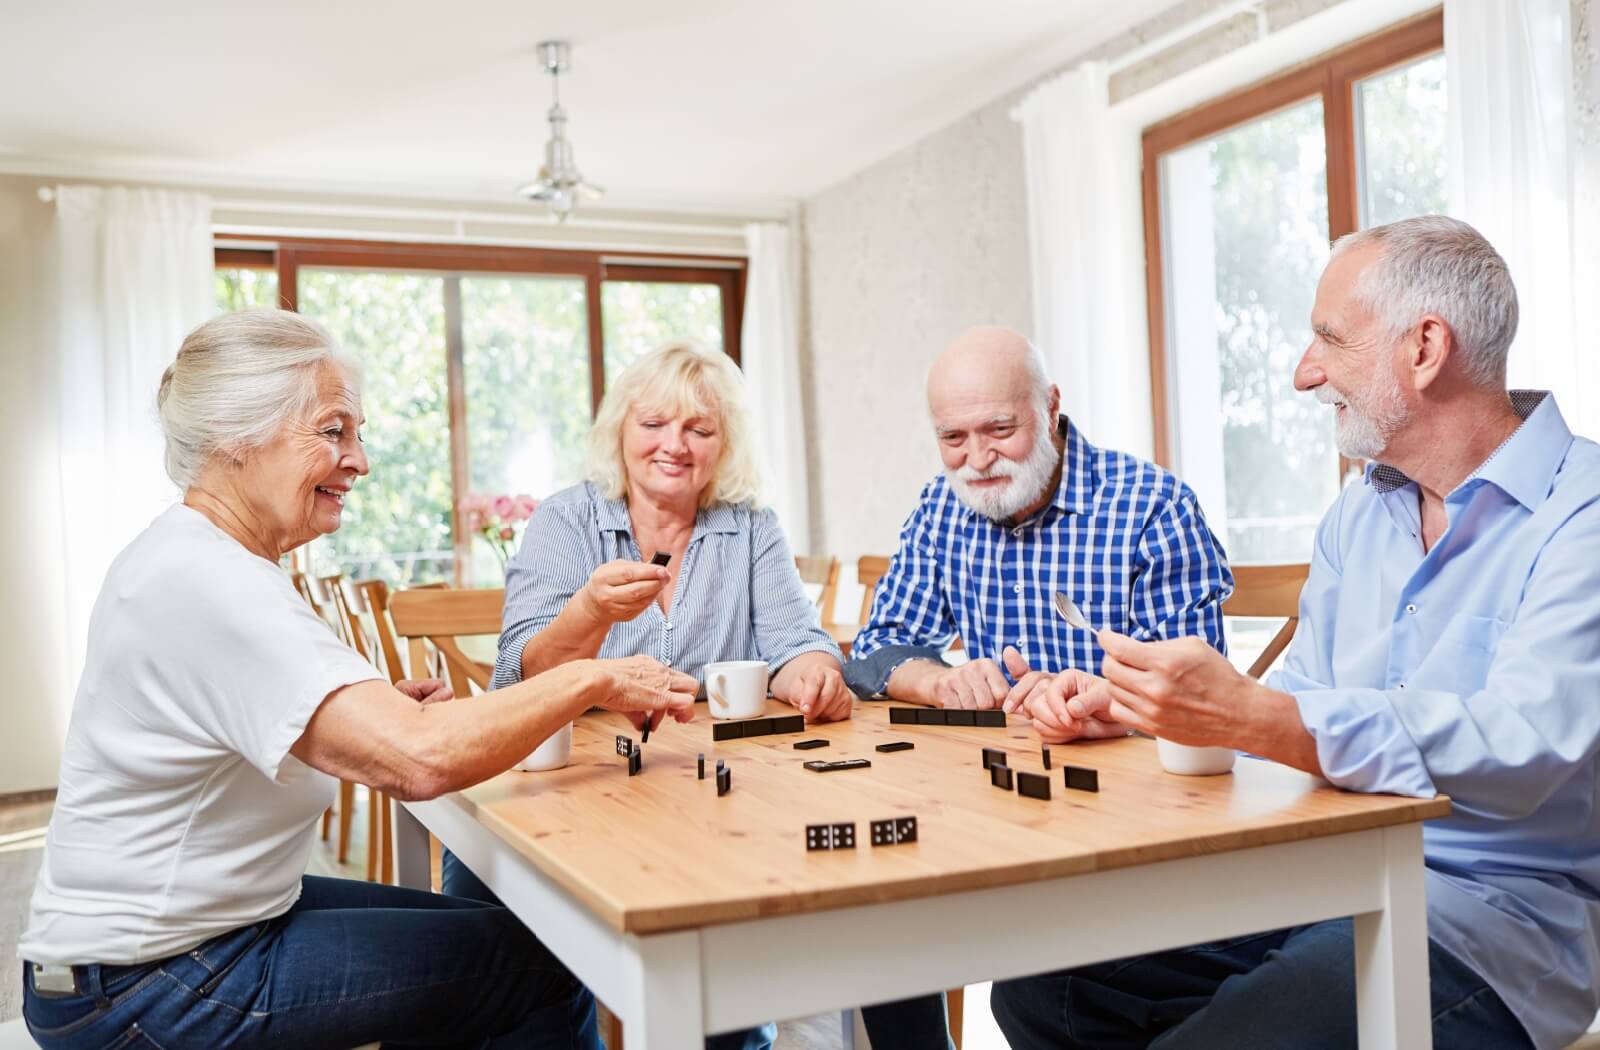 A group of older adults playing dominoes in a sunlit room.